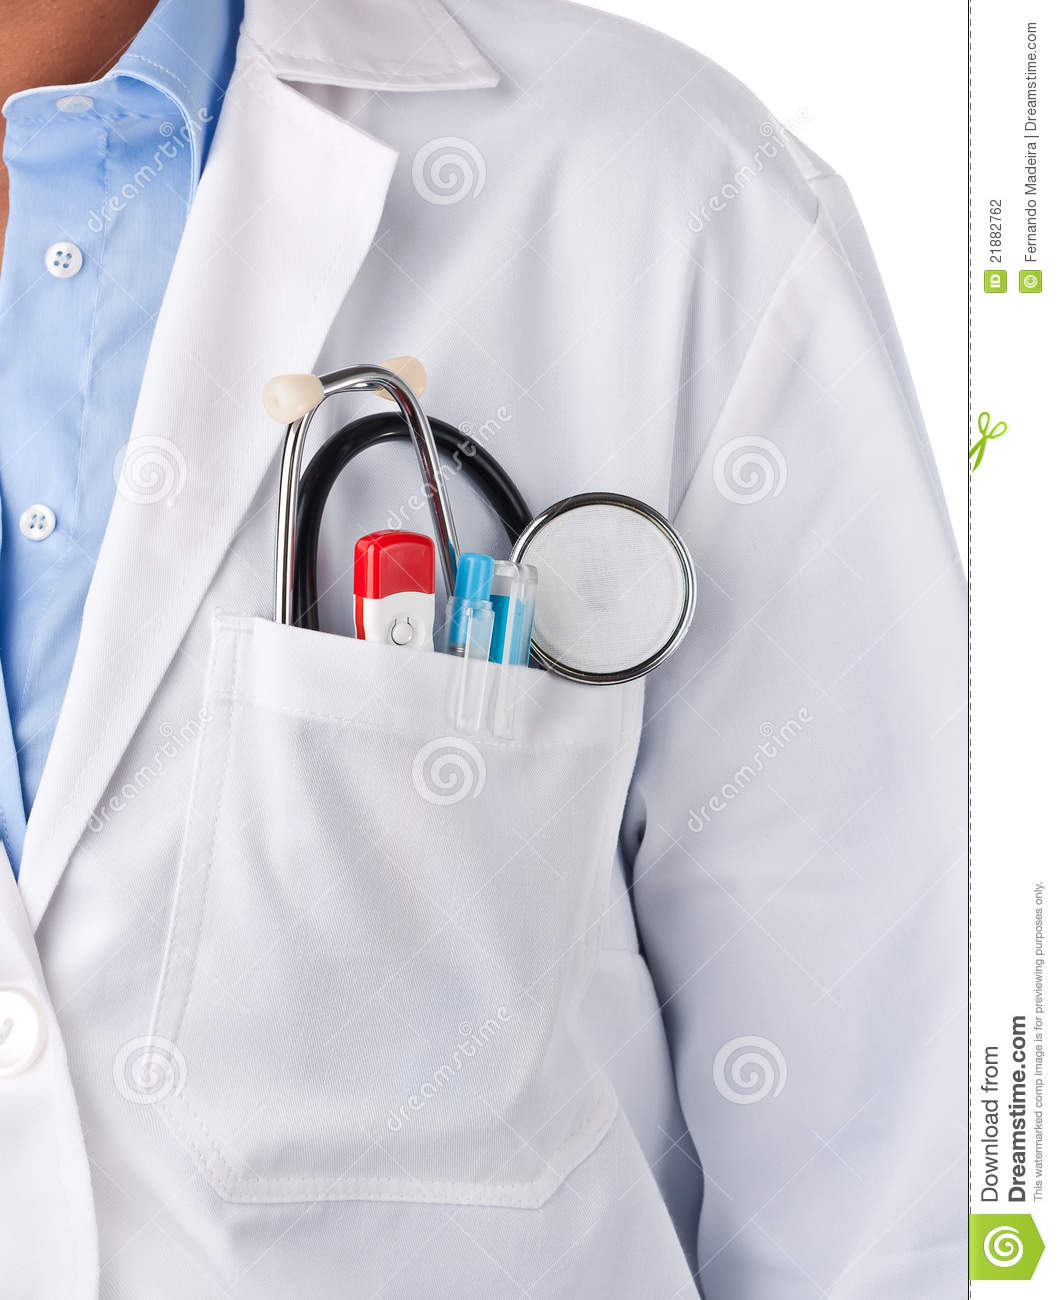 With Stethoscope Thermometer And Pens Inside Lab Coat Pocket